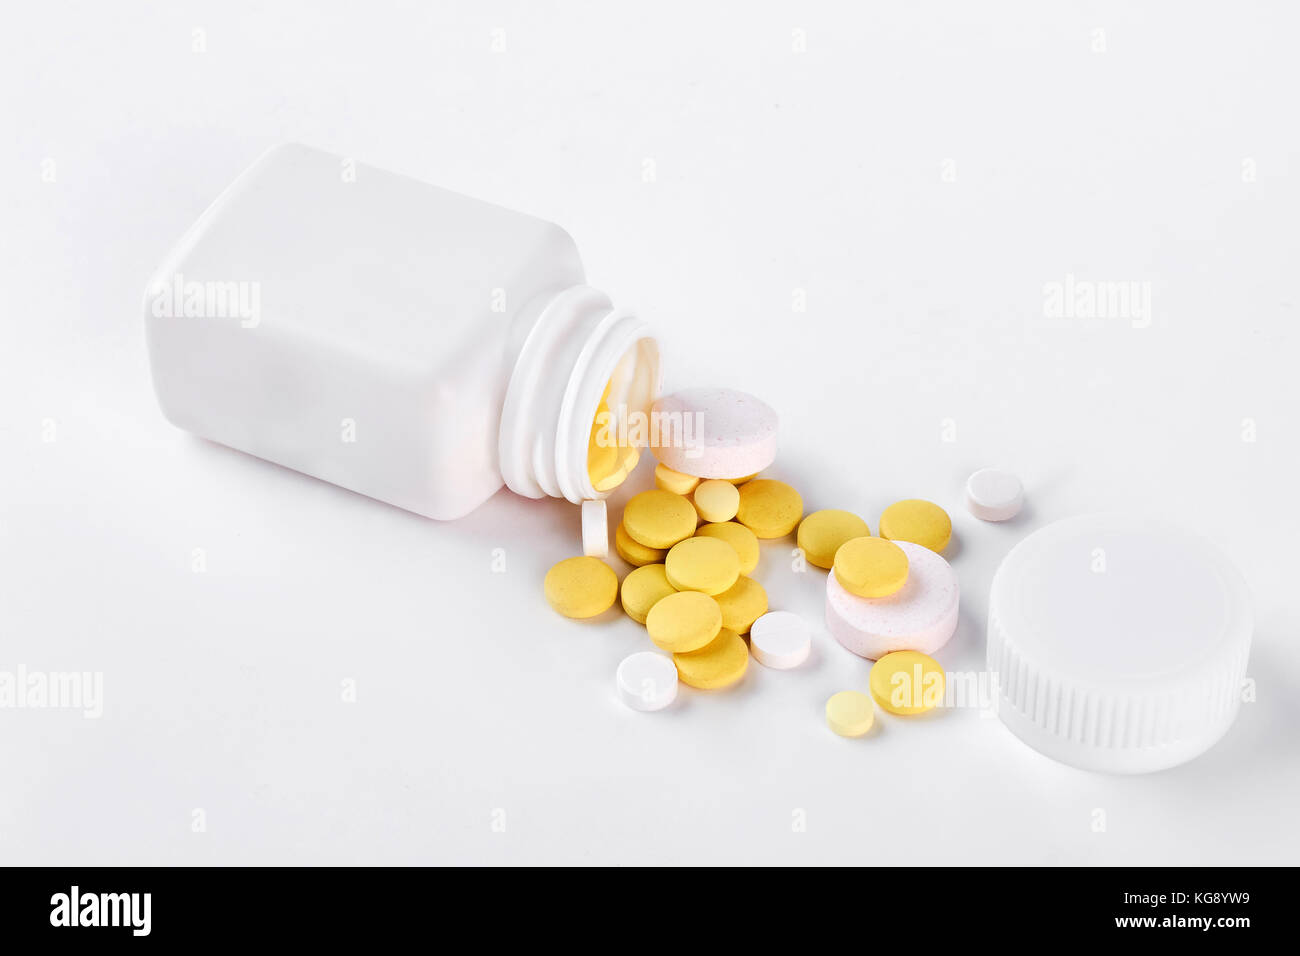 Download Yellow Pills And White Bottle Stock Photo Alamy Yellowimages Mockups